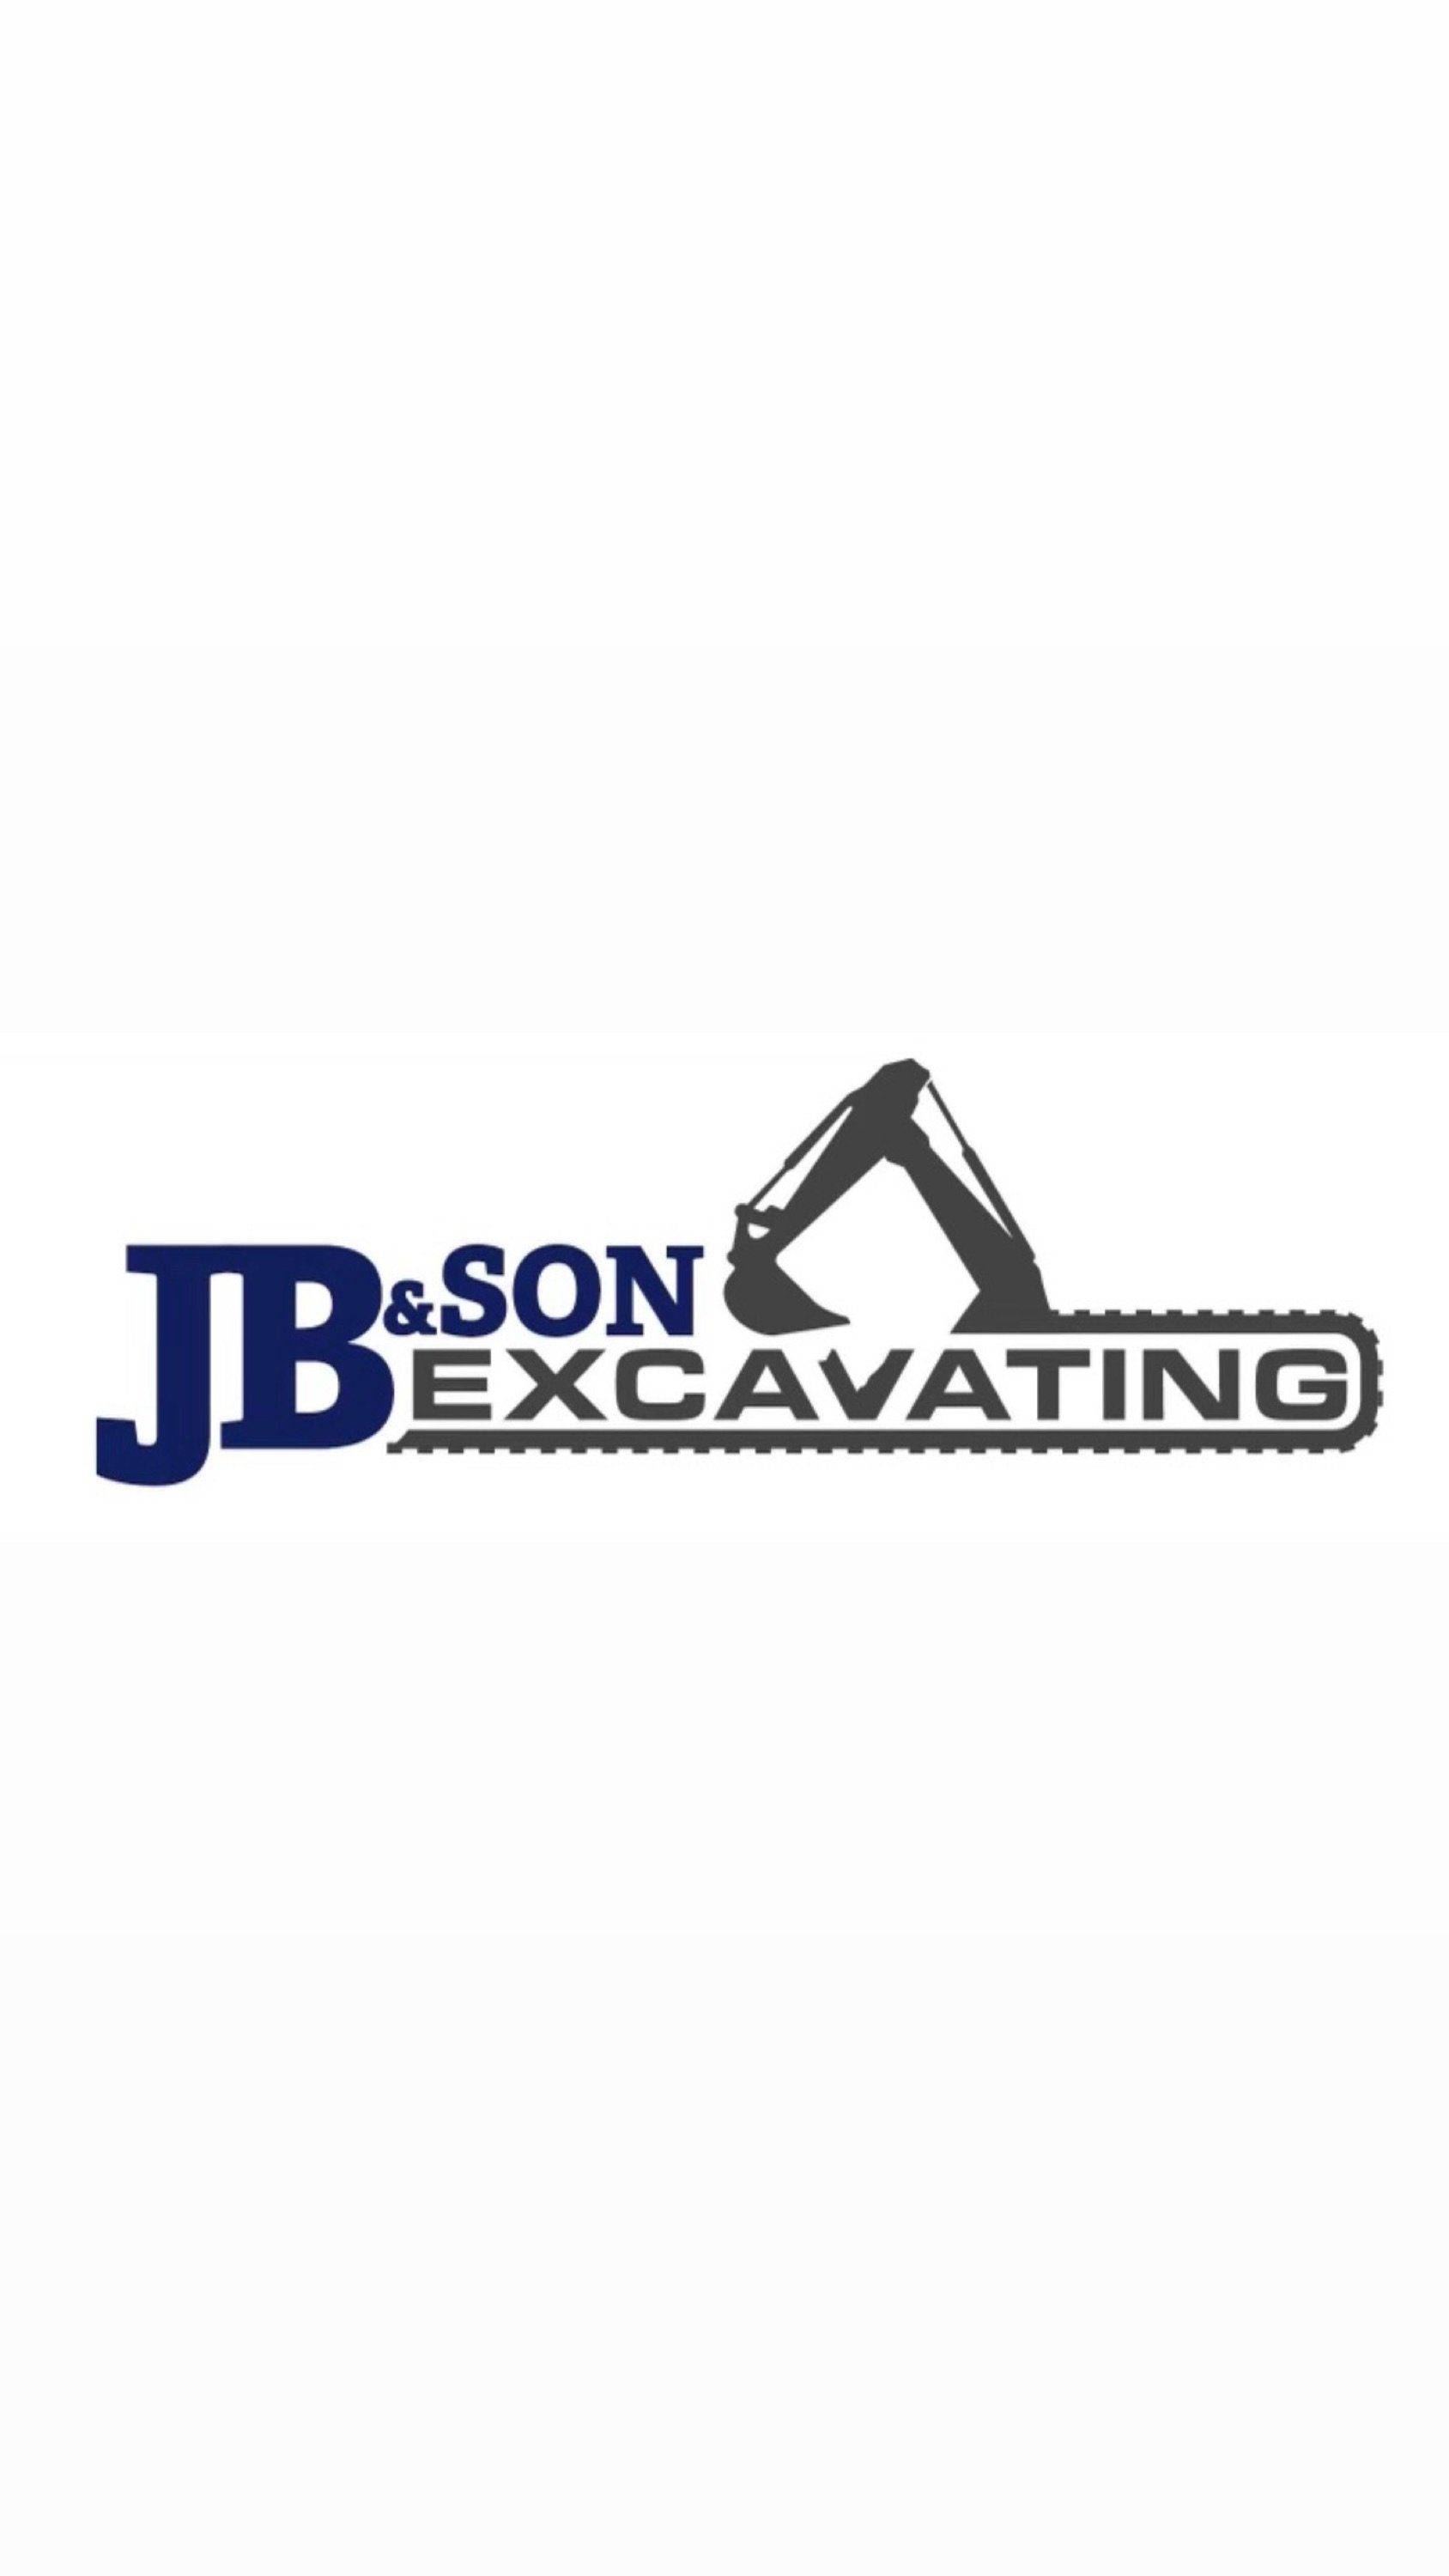 JB and Son Excavating Logo